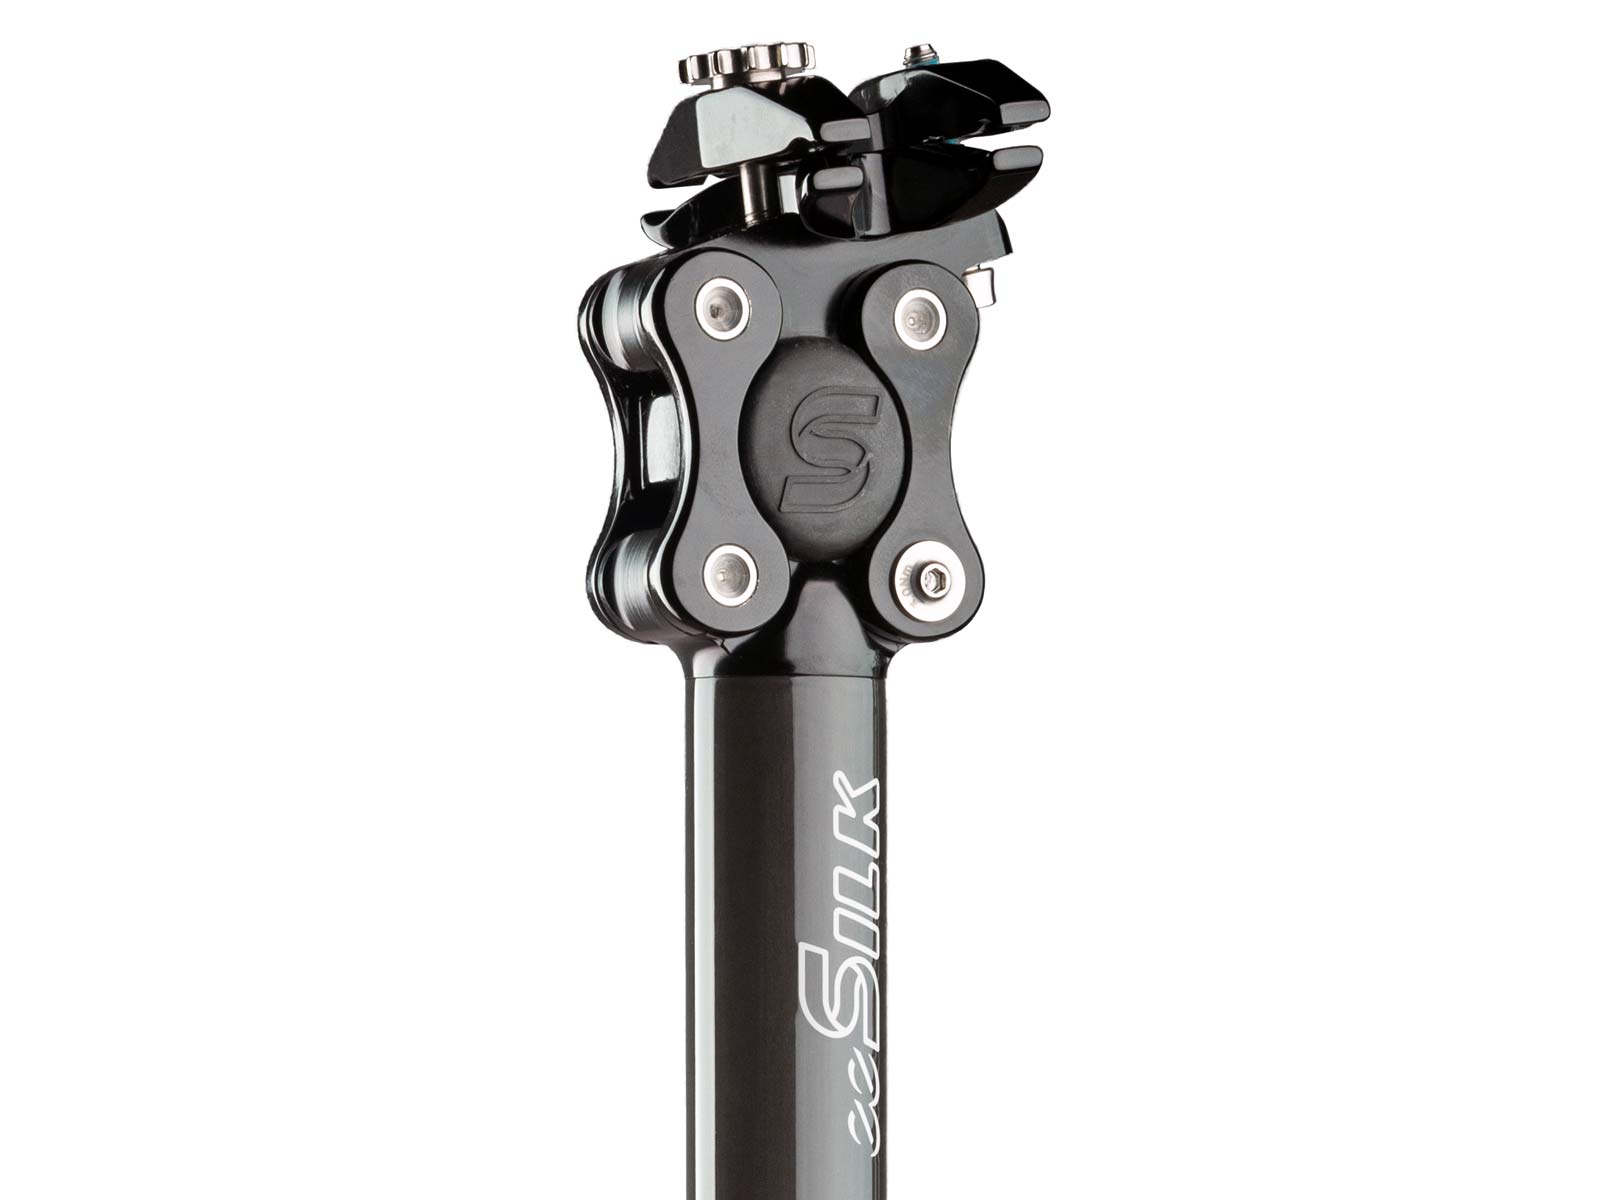 Cane Creek eeSilk Carbon or alloy lightweight 20mm suspension seatpost, stainless steel pivot axles